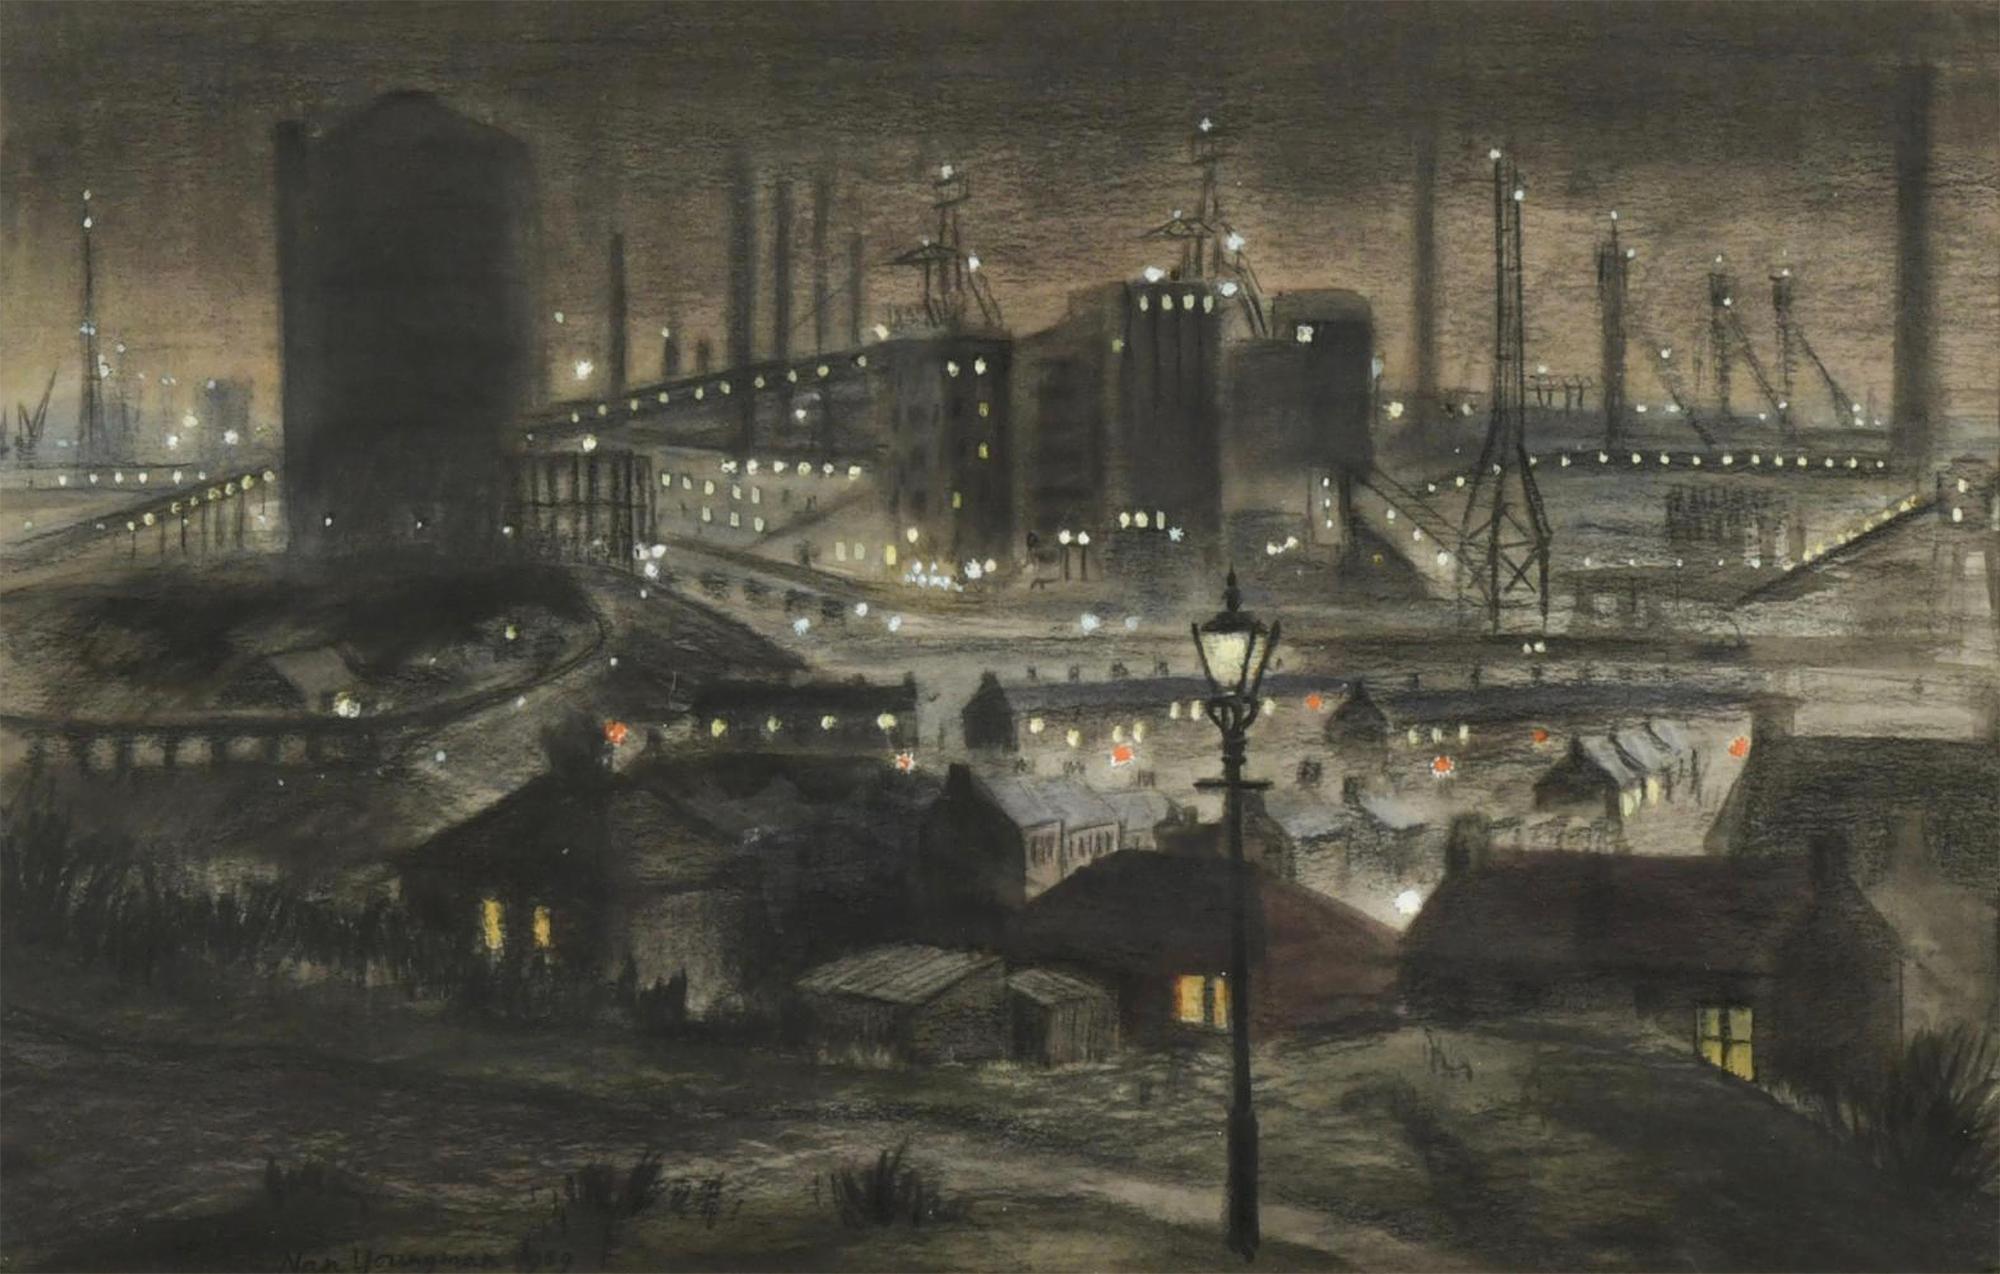 Nan Youngman Landscape Painting - Industrial Steel Plant at Night Port Talbot - Mid-Century  - like L. S. Lowry